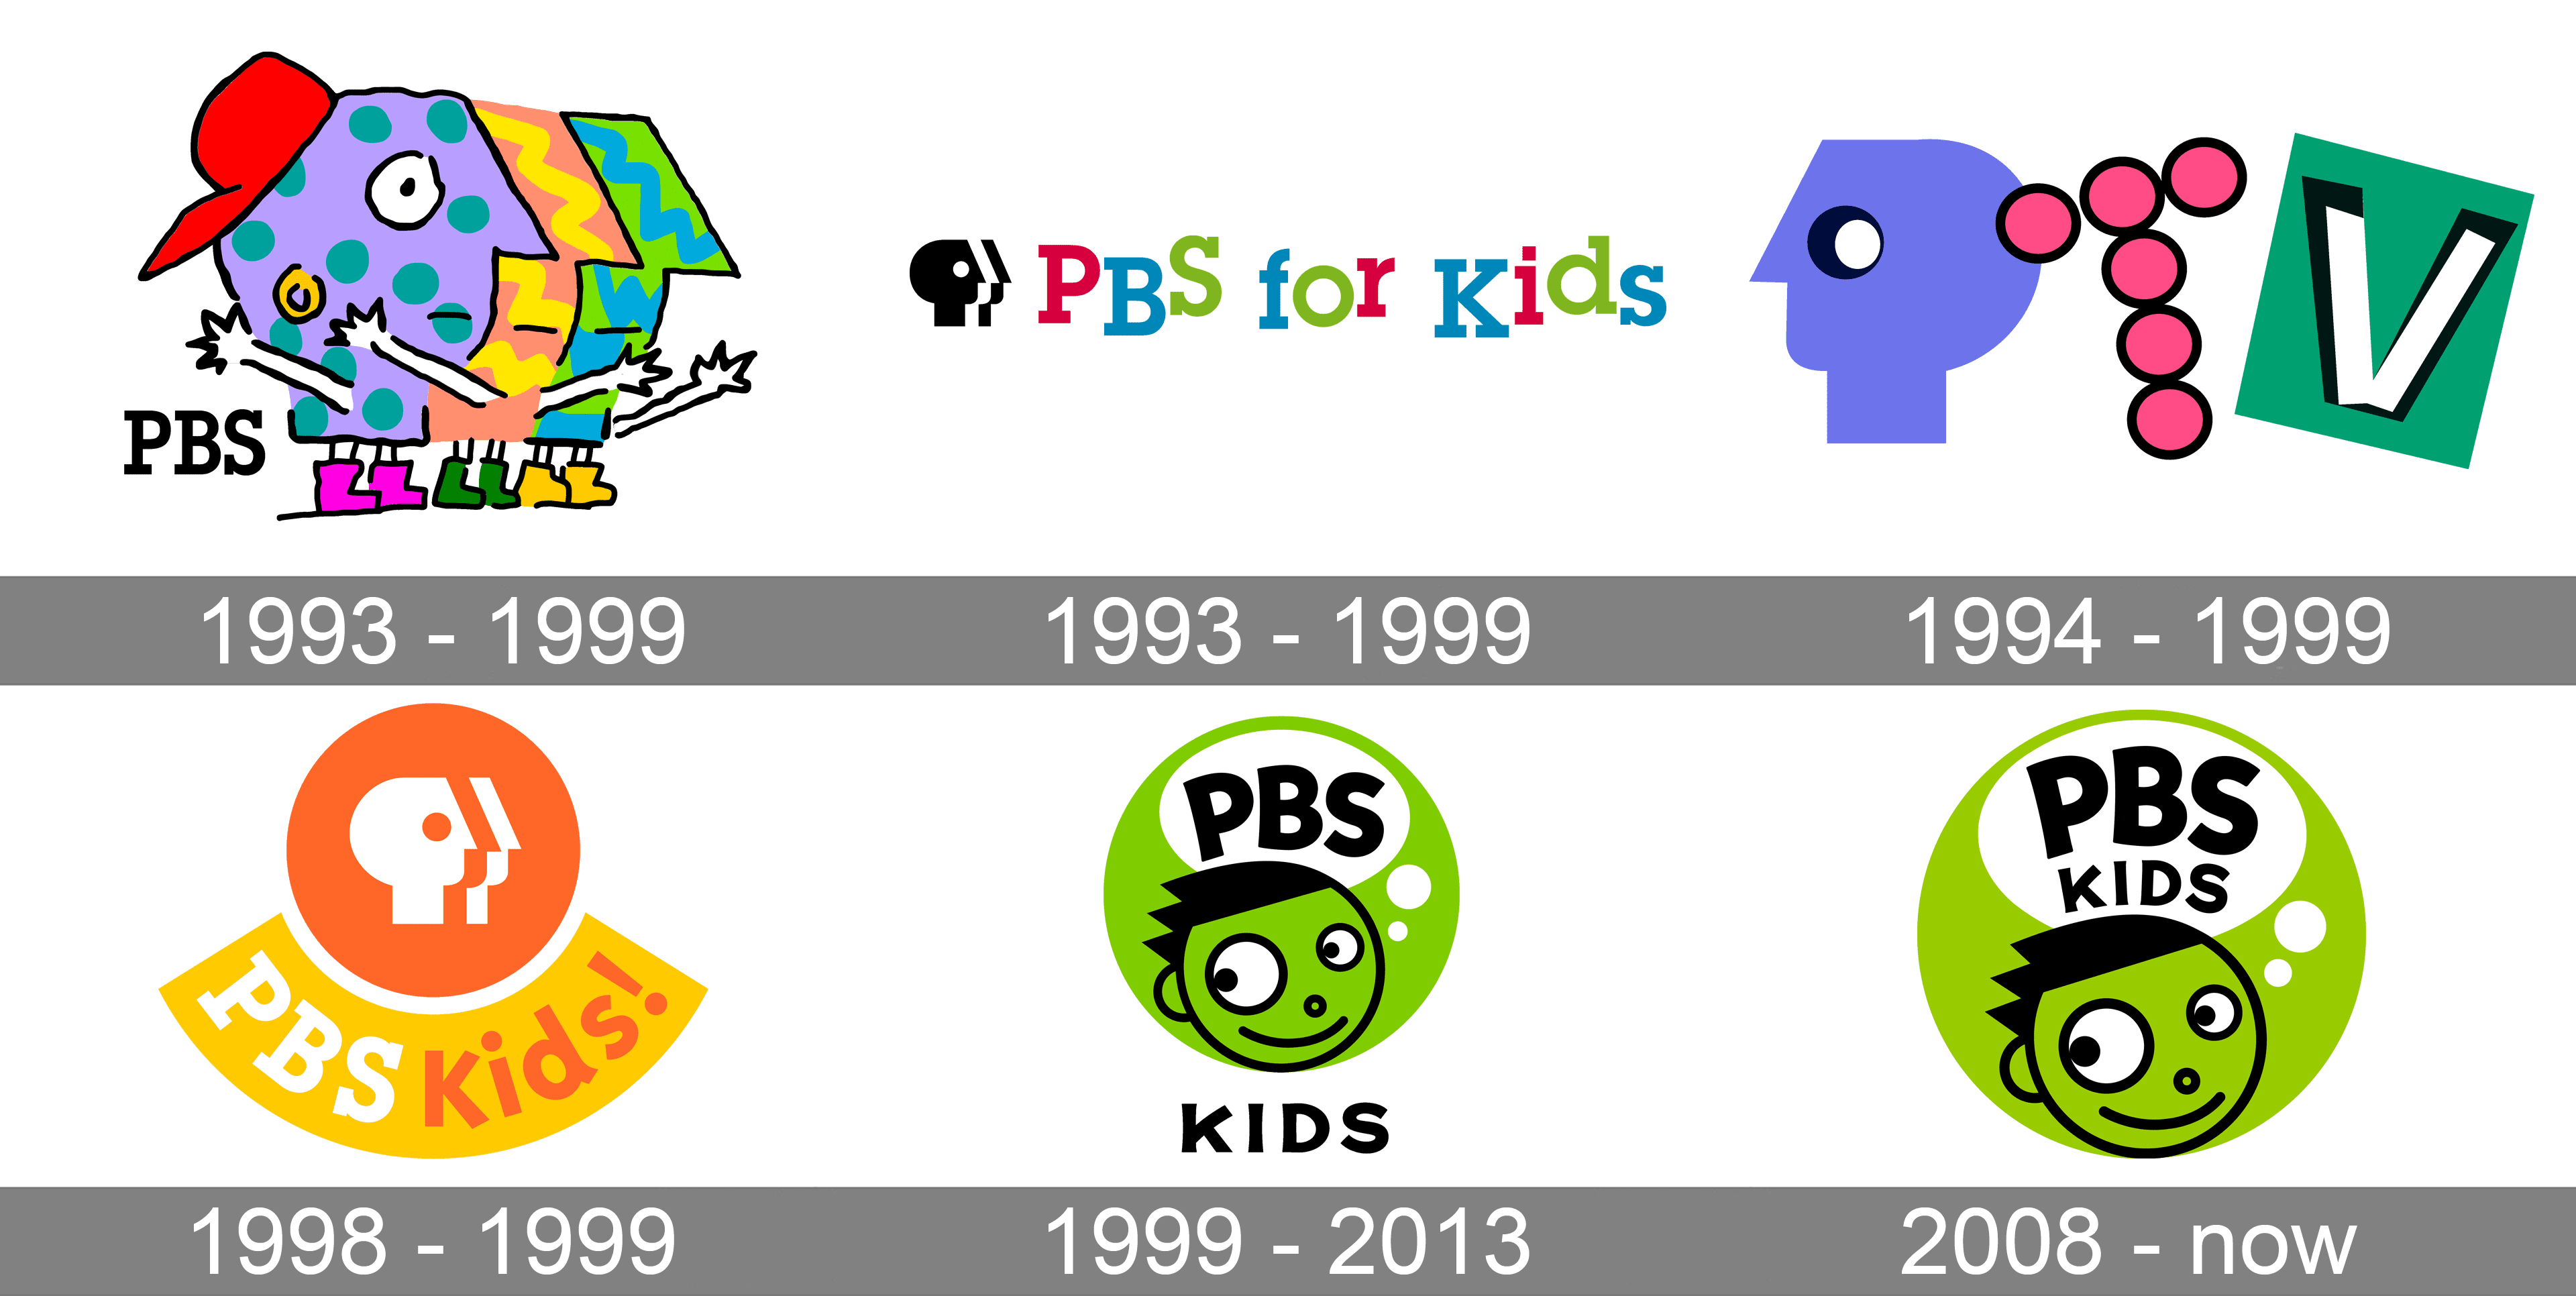 pbs-kids-logo-and-symbol-meaning-history-png